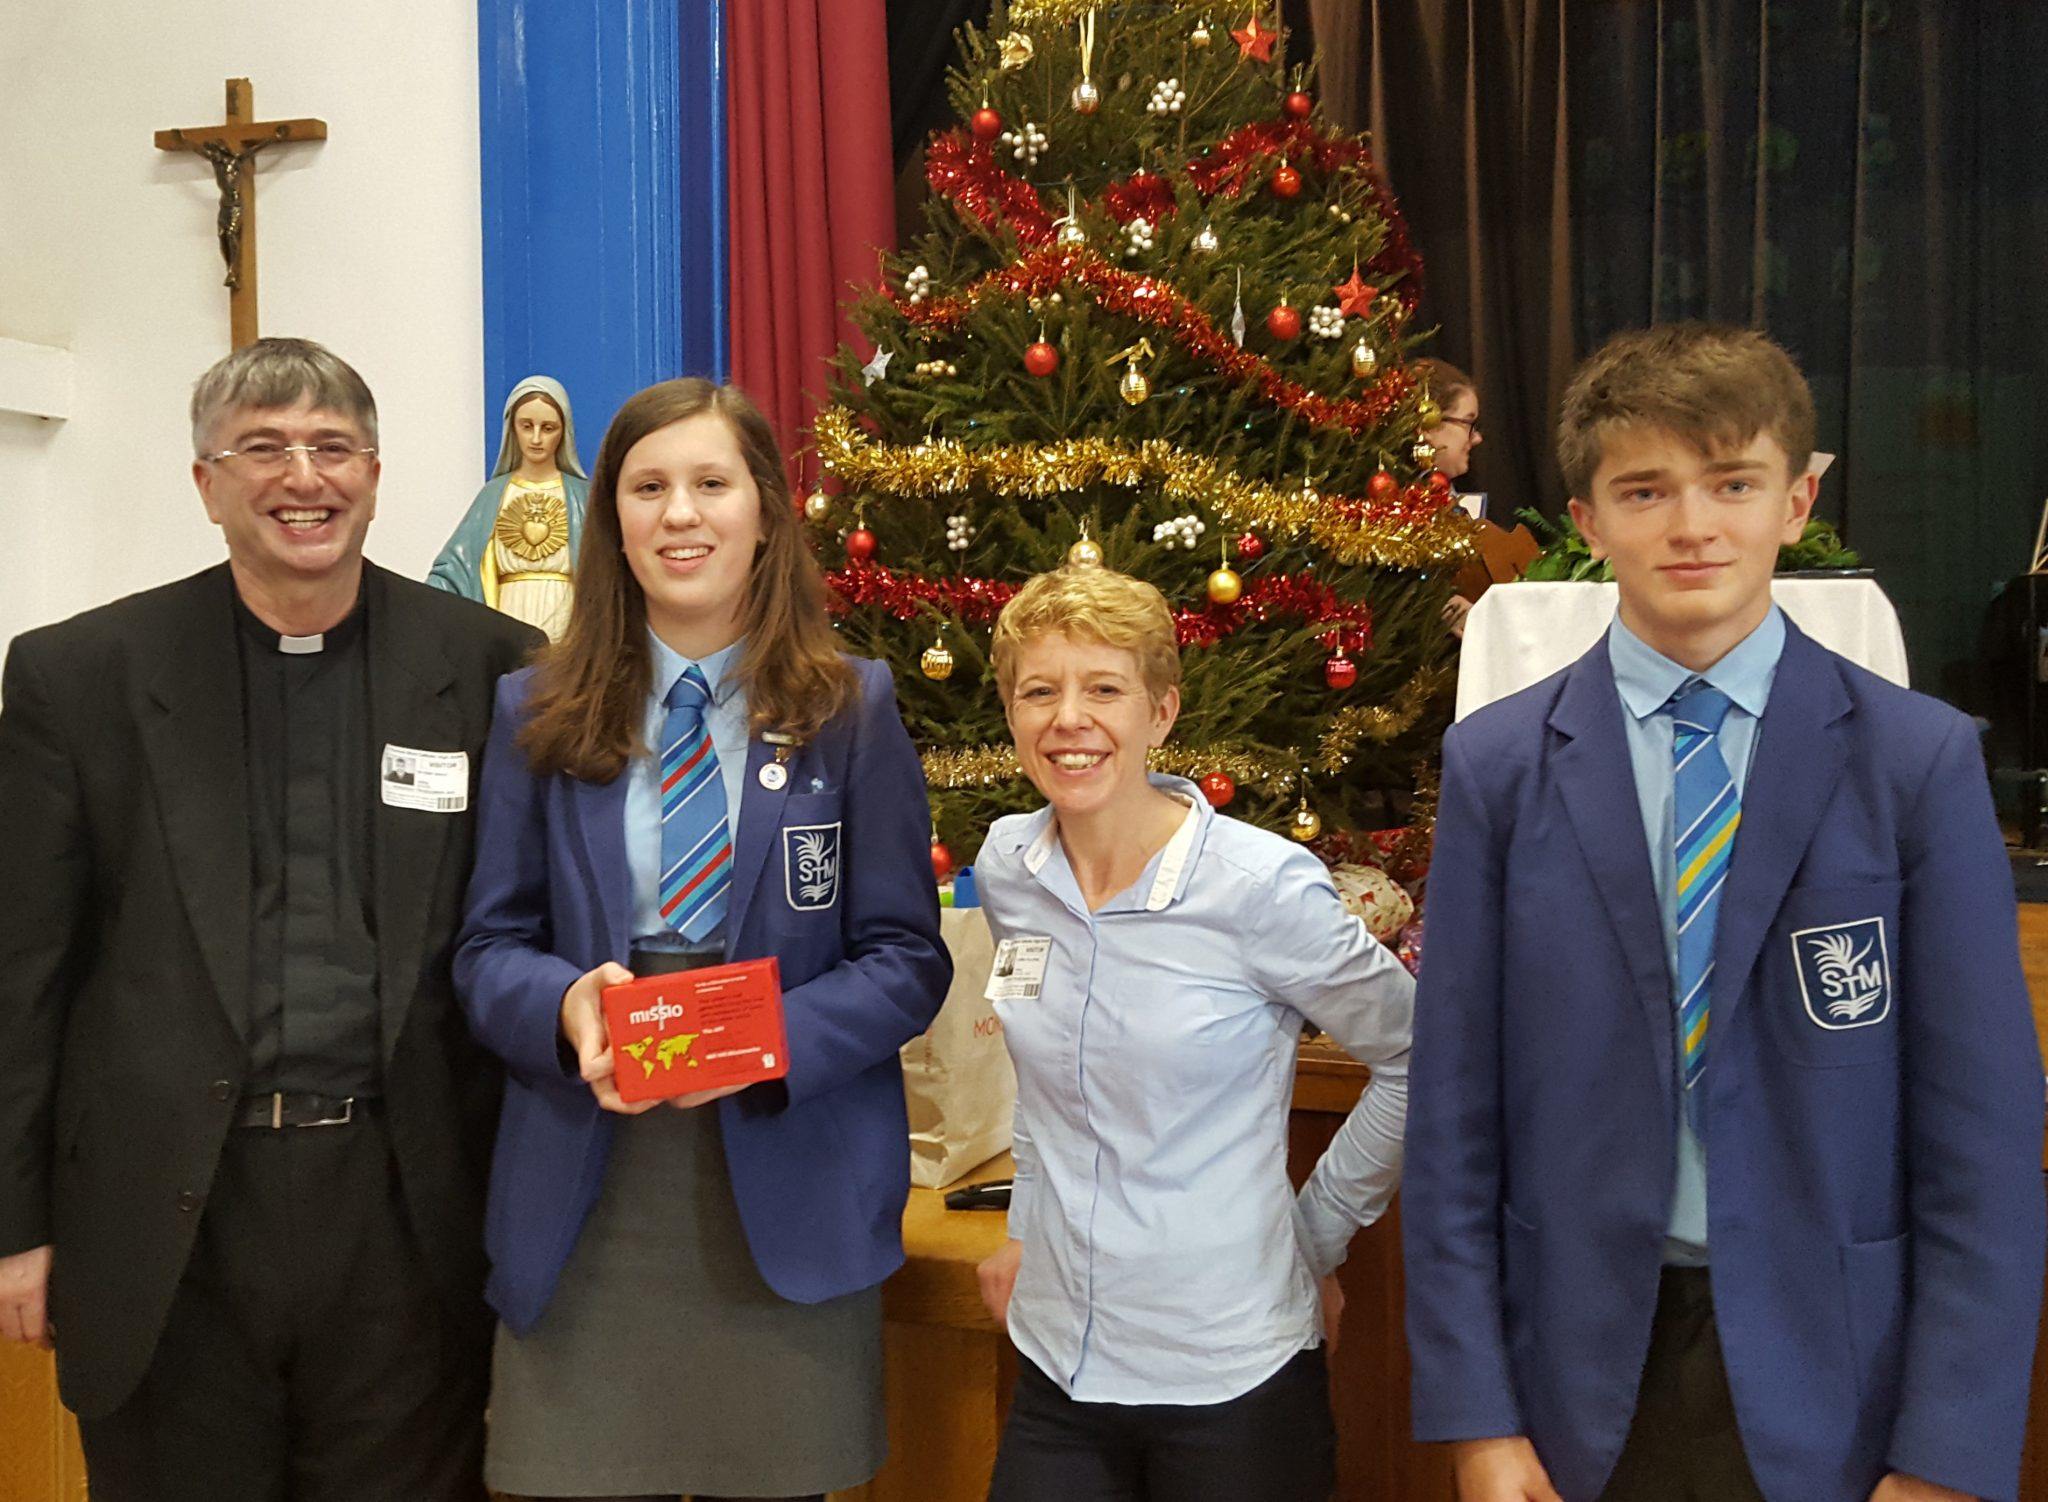 St Thomas More students, Diocesan Director, Father Anthony Grace, Red Box